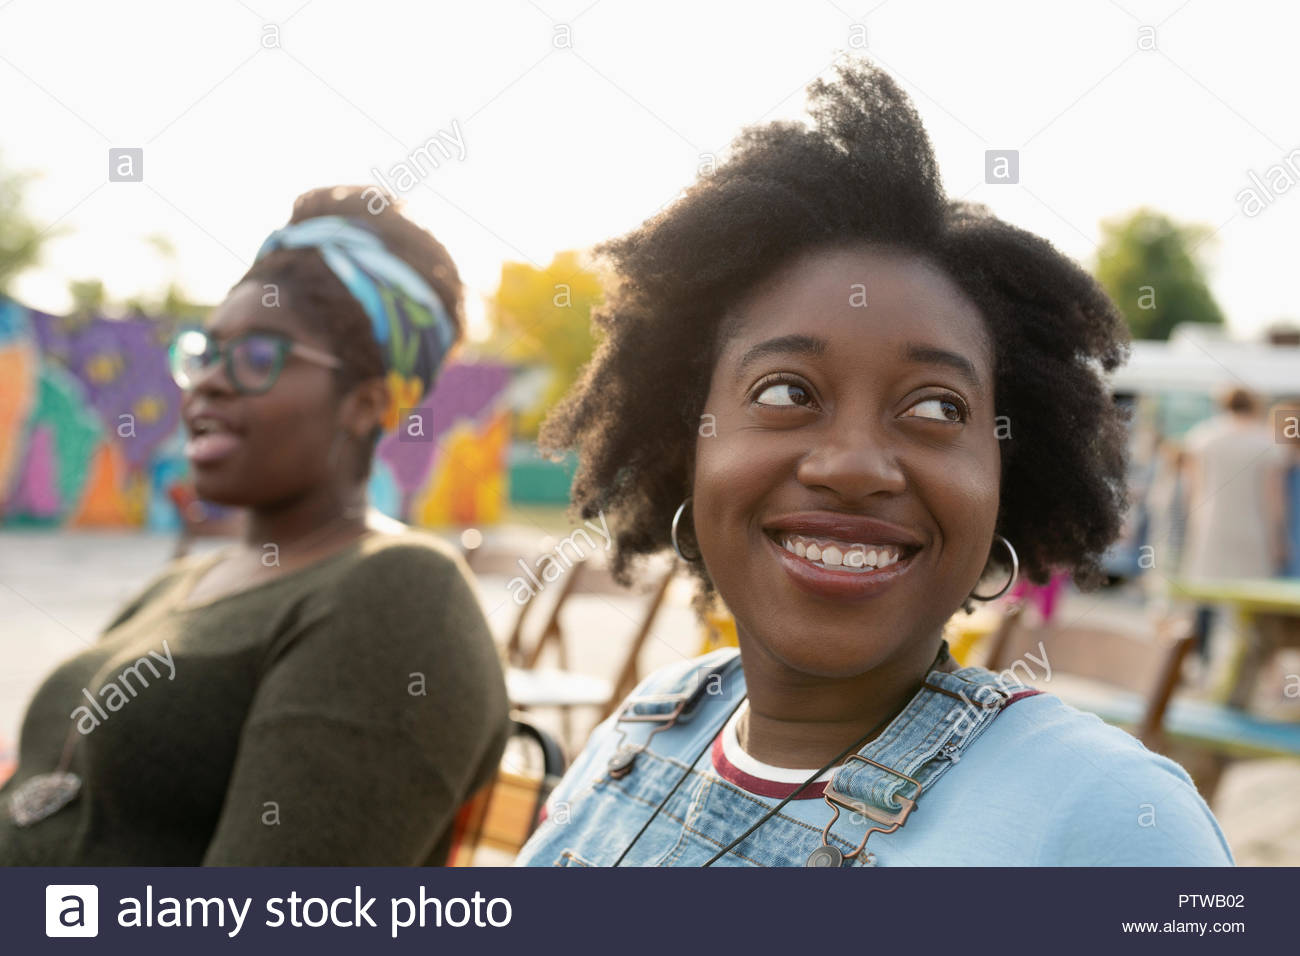 Portrait smiling young woman looking over shoulder Stock Photo